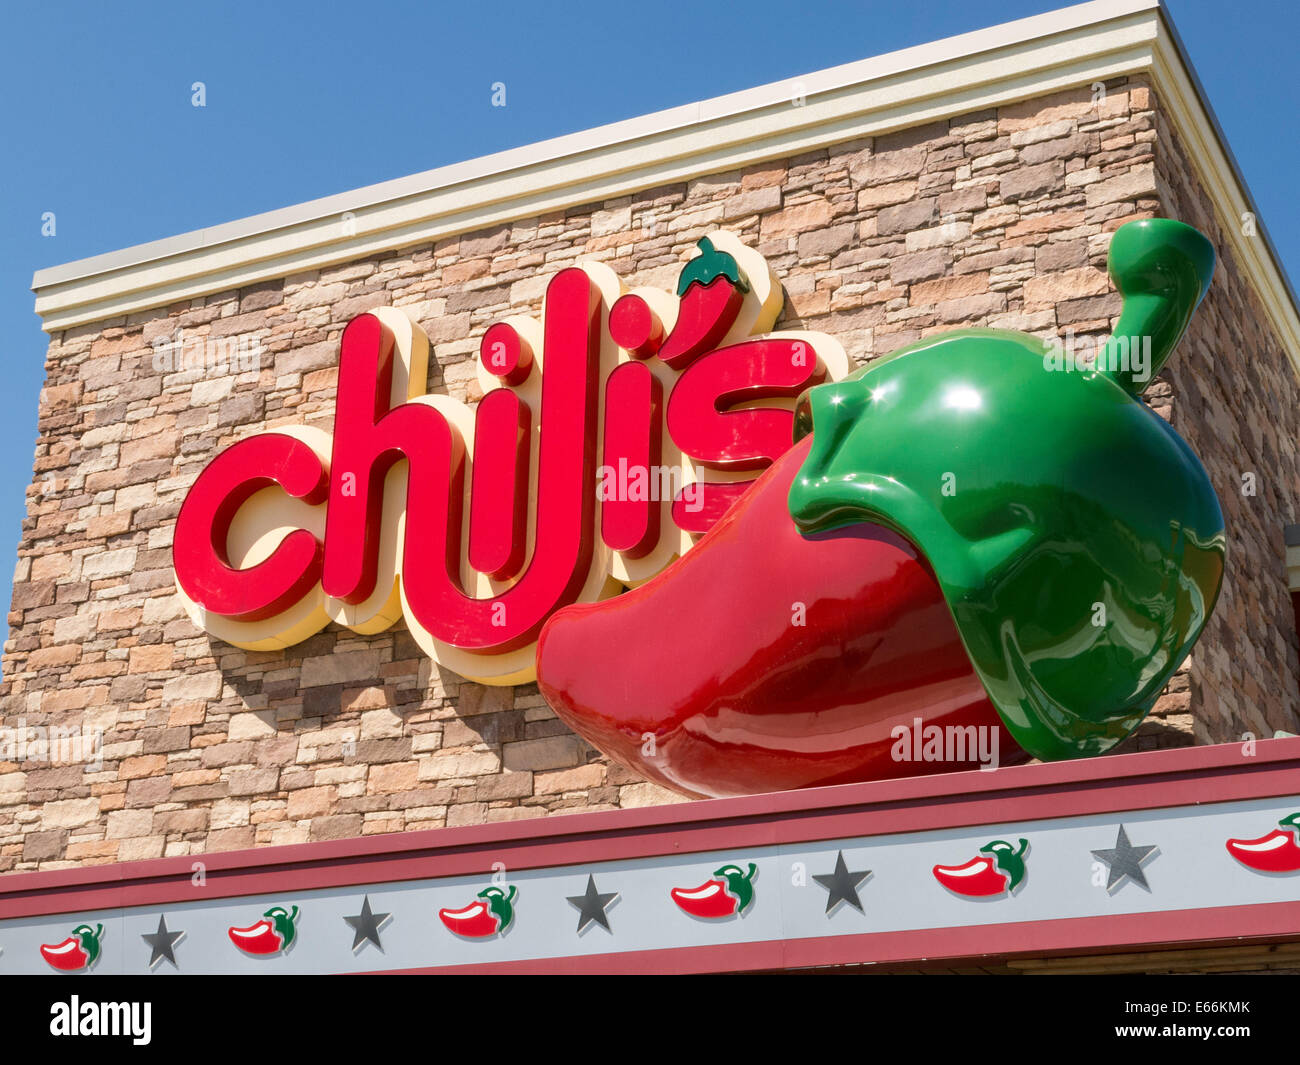 Chili's Restaurant Exterieur in Great Falls, Montana, USA Stockfoto